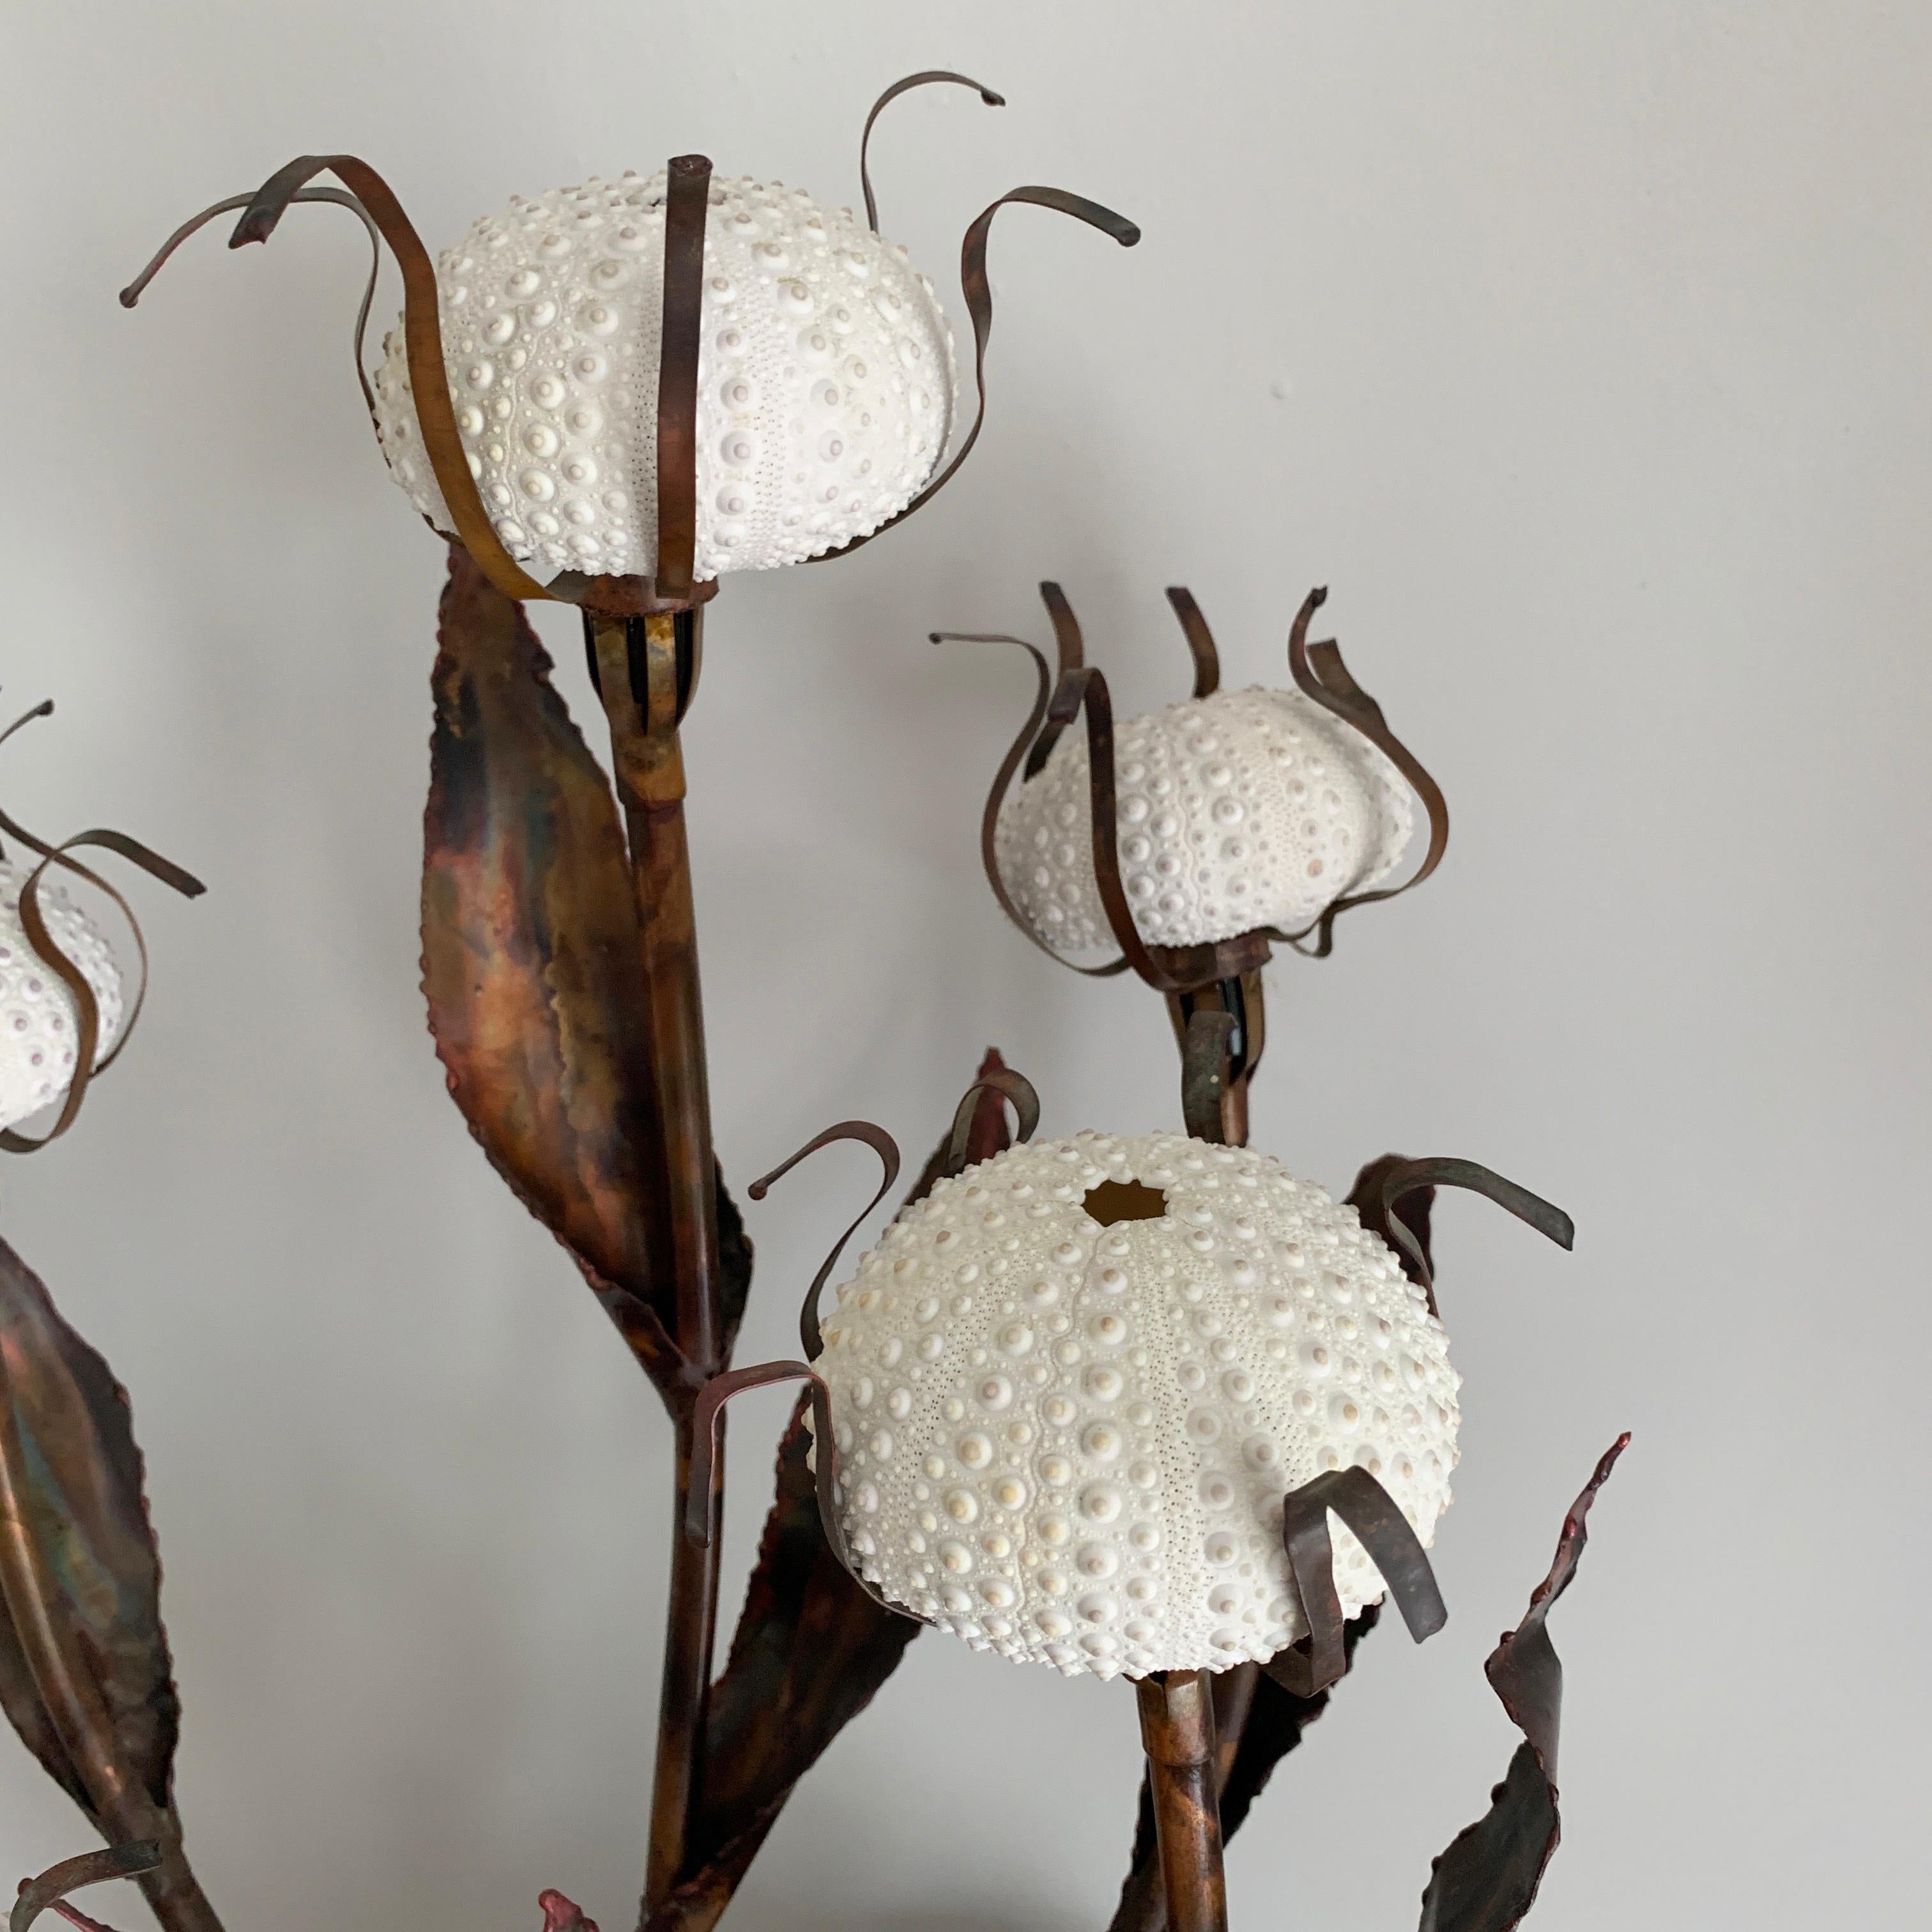 Curtis Jere Sea Urchin table lamp,
circa 1960s-1970s
A fantastic composition of naturalistic stems and leaves in patinated copper carrying five lights made of real sea urchin shells held in place with petal like forms.
When the lights are on the